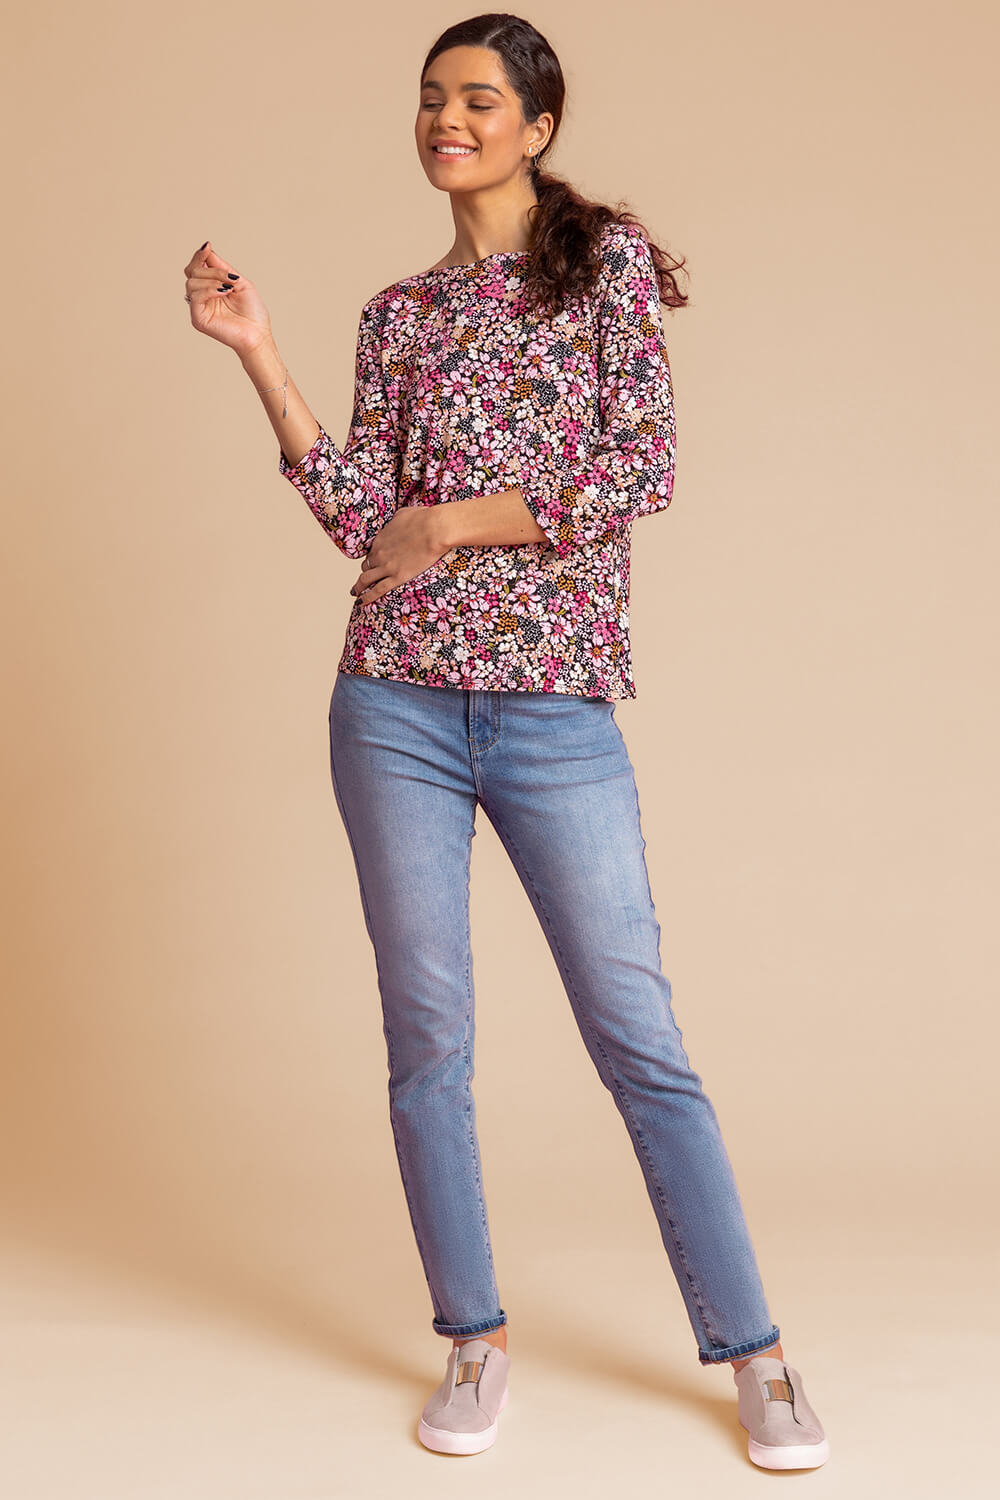 PINK Ditsy Floral Print Jersey Top, Image 3 of 4